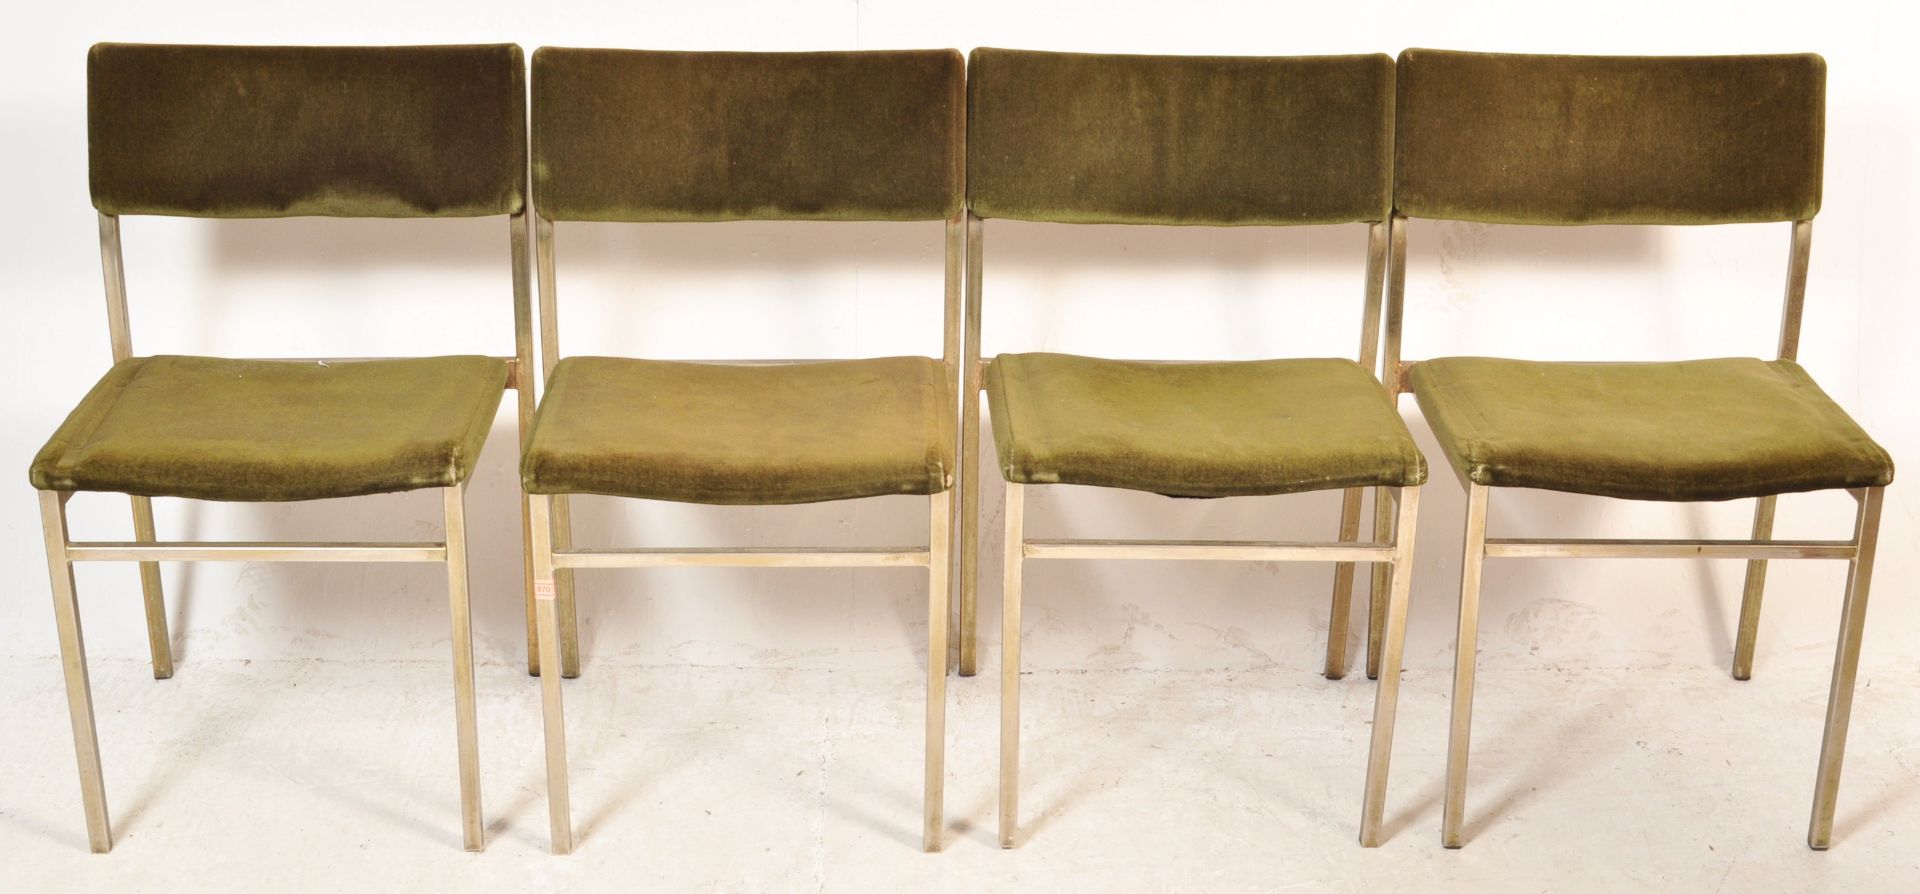 FOUR VINTAGE RETRO 20TH STACKING DINING CHAIRS. - Image 2 of 7